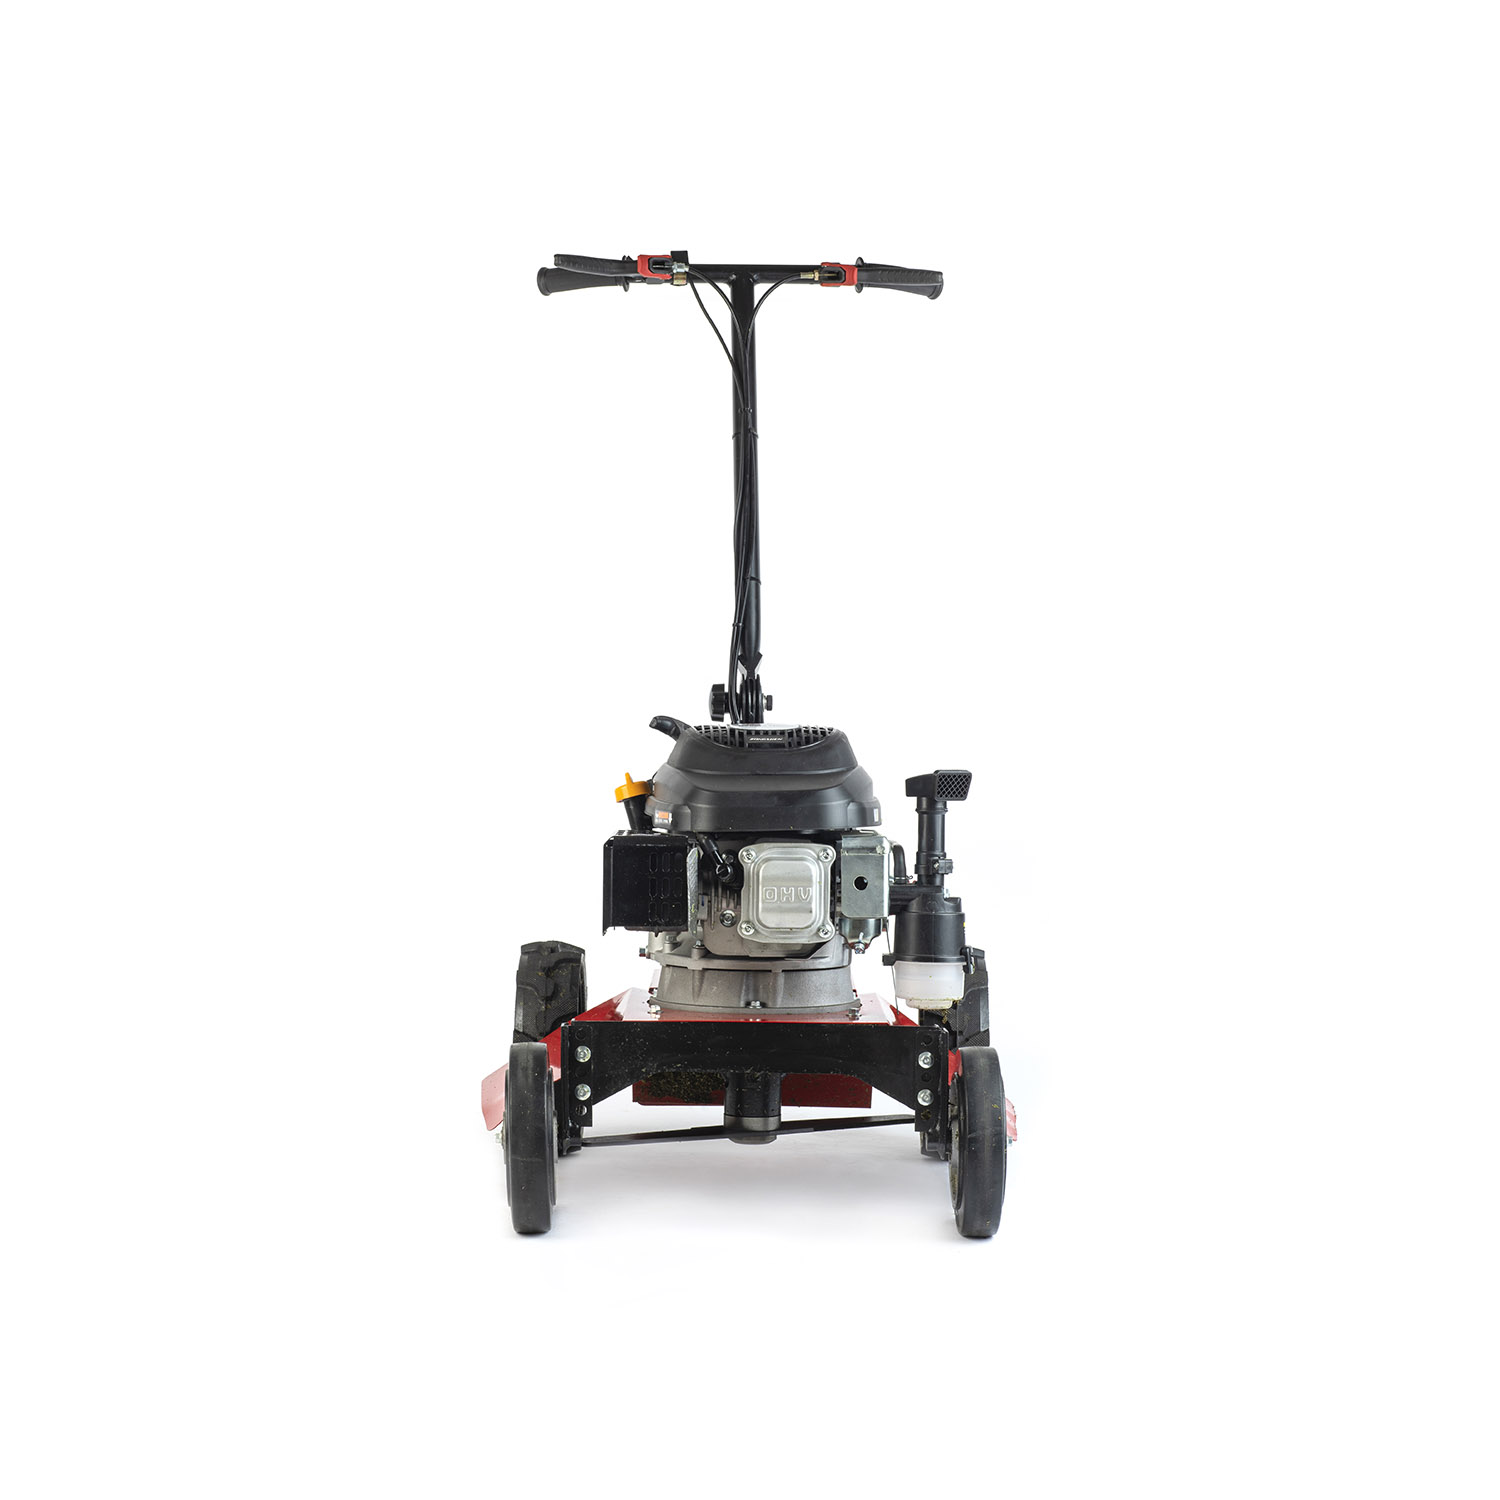 Auto Walk Brushcutter Lawn Mowers for cutting grass